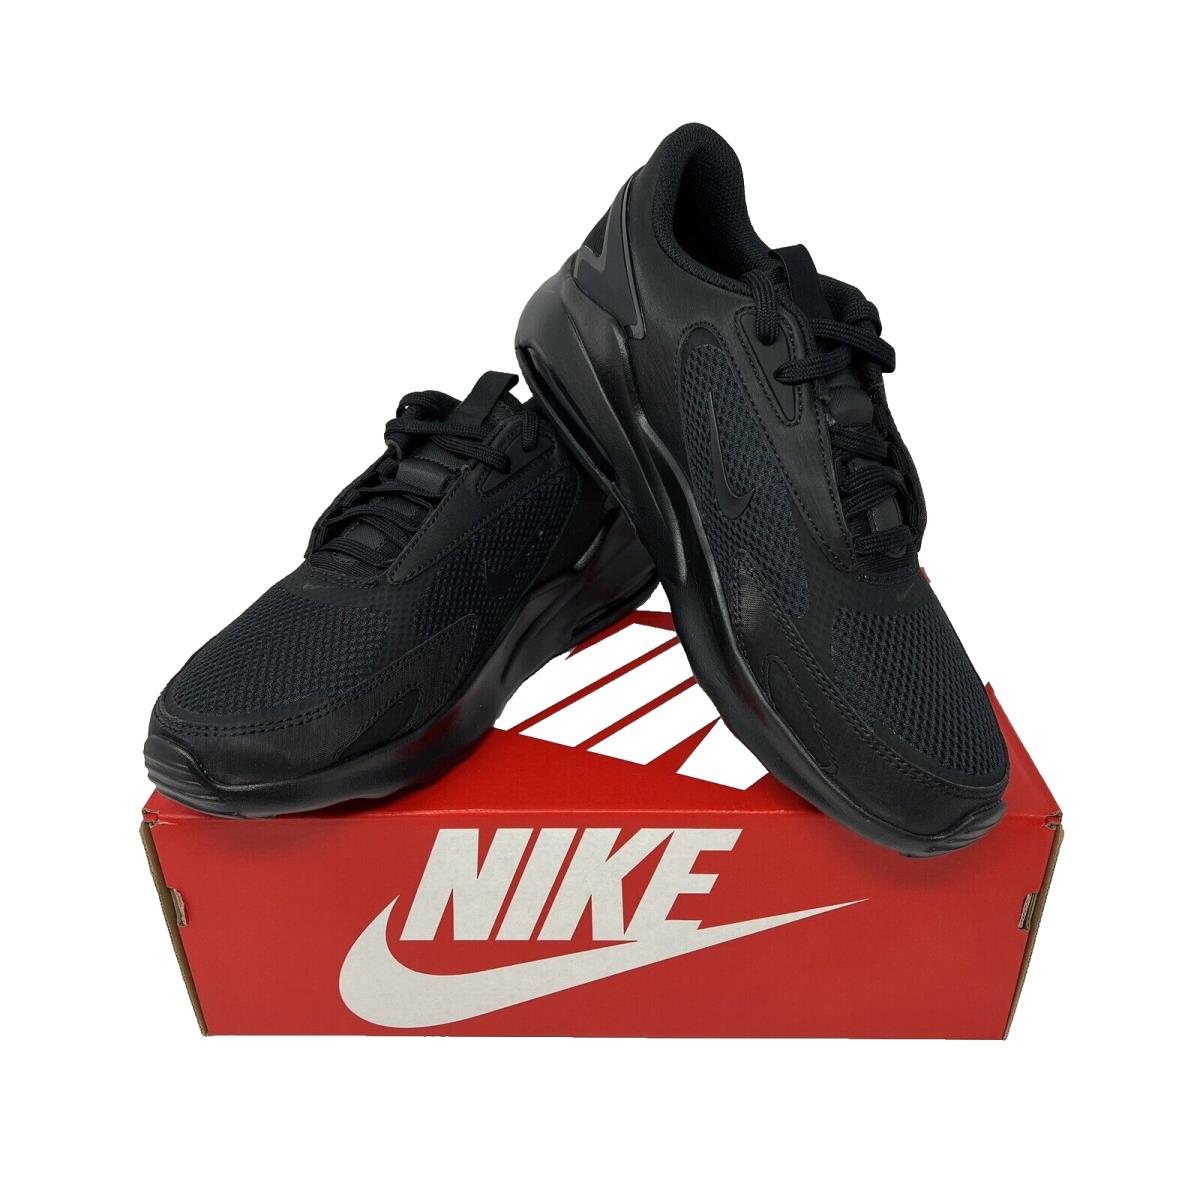 Nike Air Max Bolt Running Training Shoes Sneakers Mens Size 9 Black